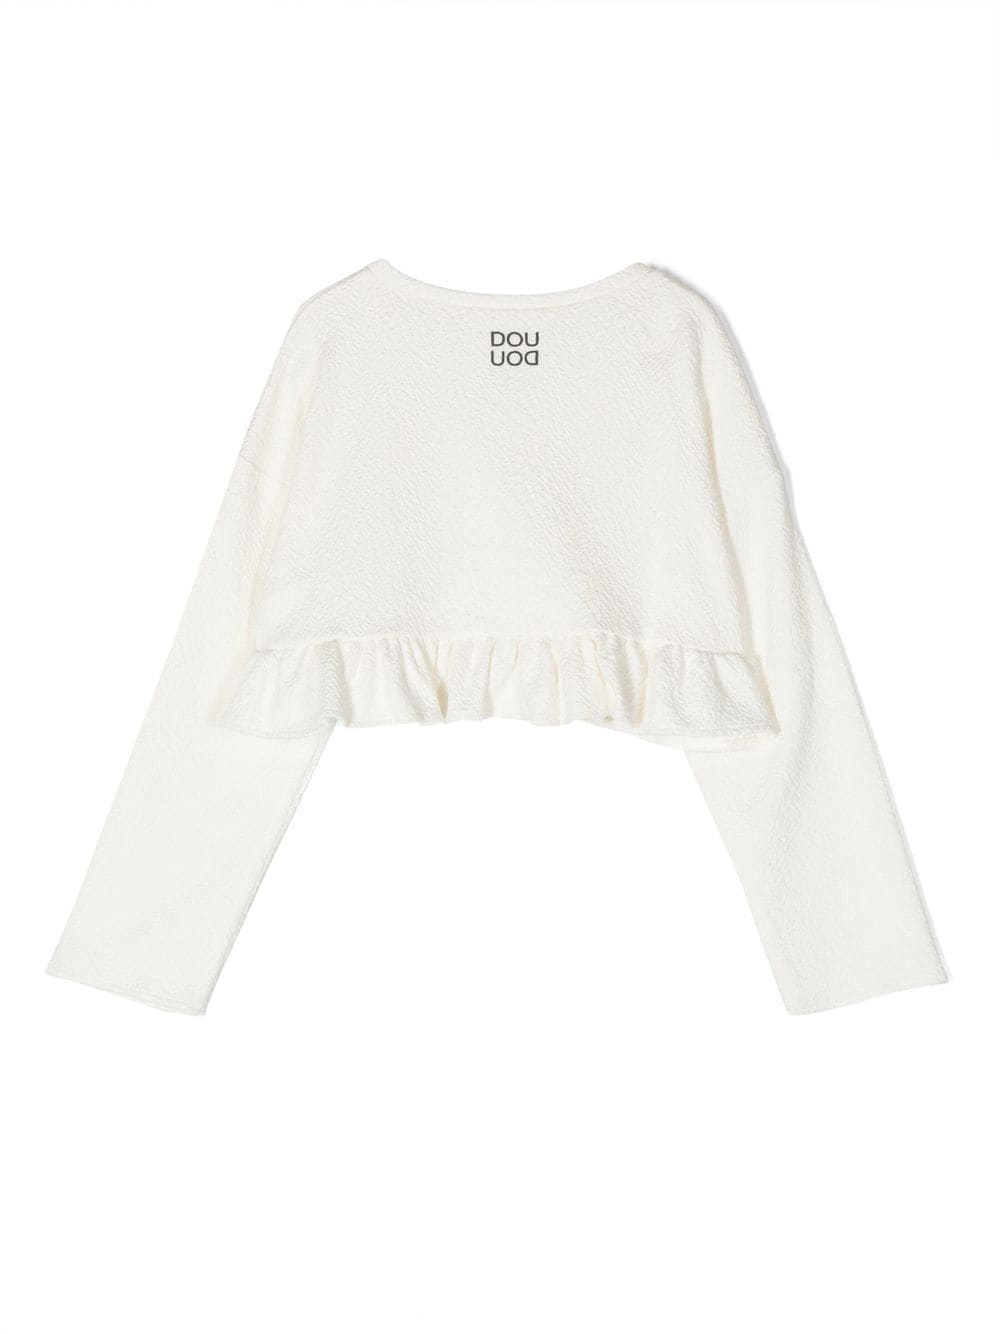 Douuod Kids Cropped top - Wit